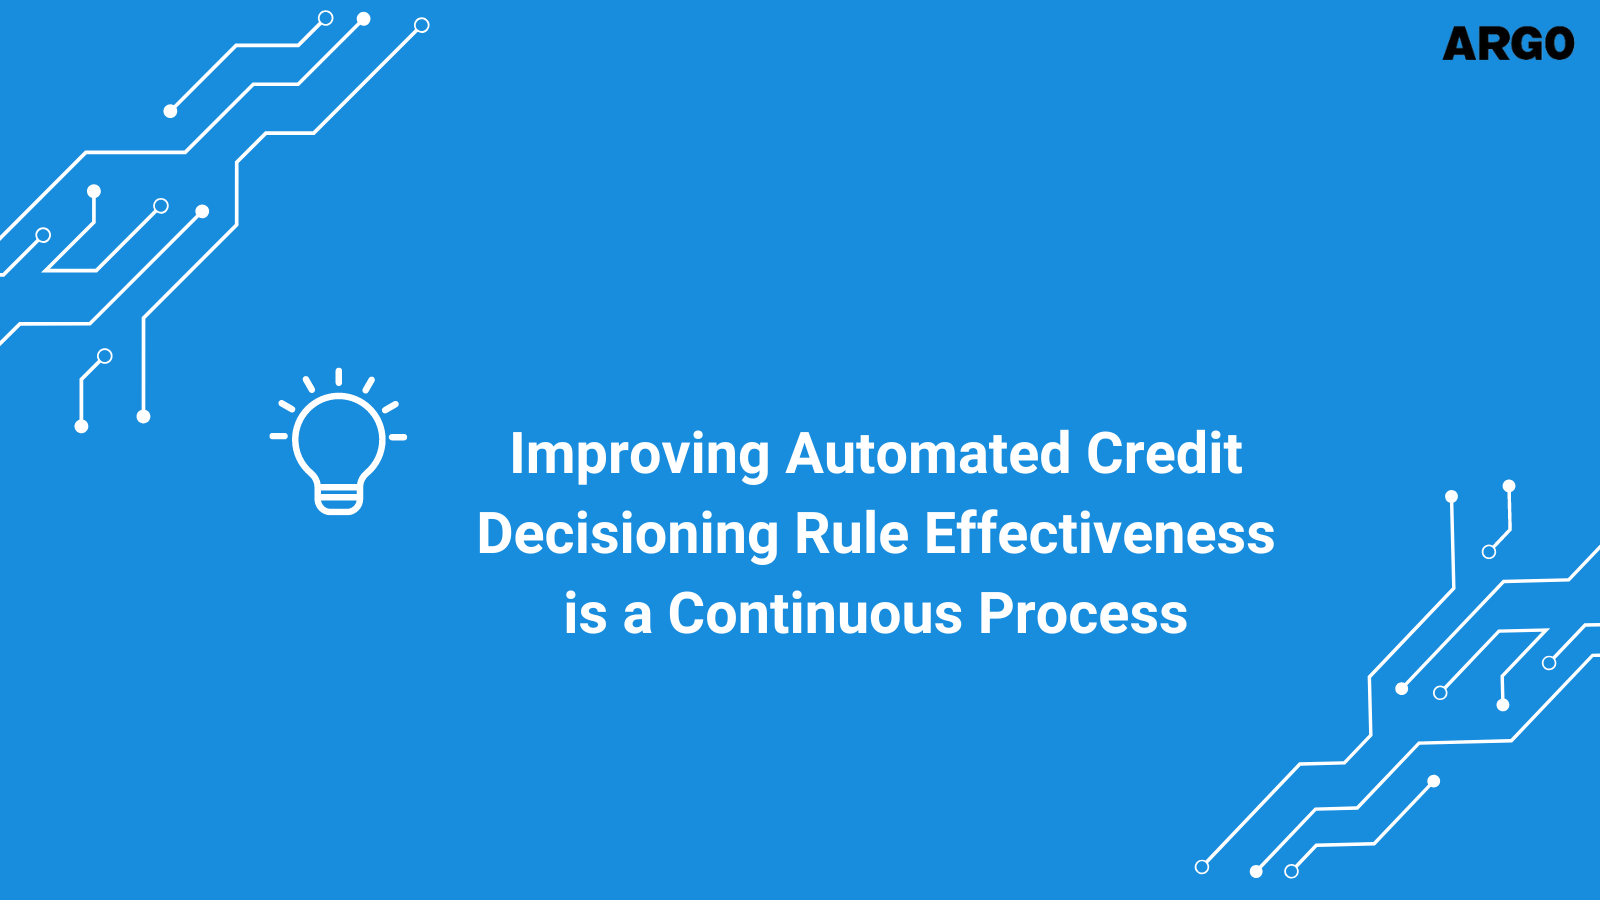 Improving Automated Credit Decisioning Rule Effectiveness is a Continuous Process